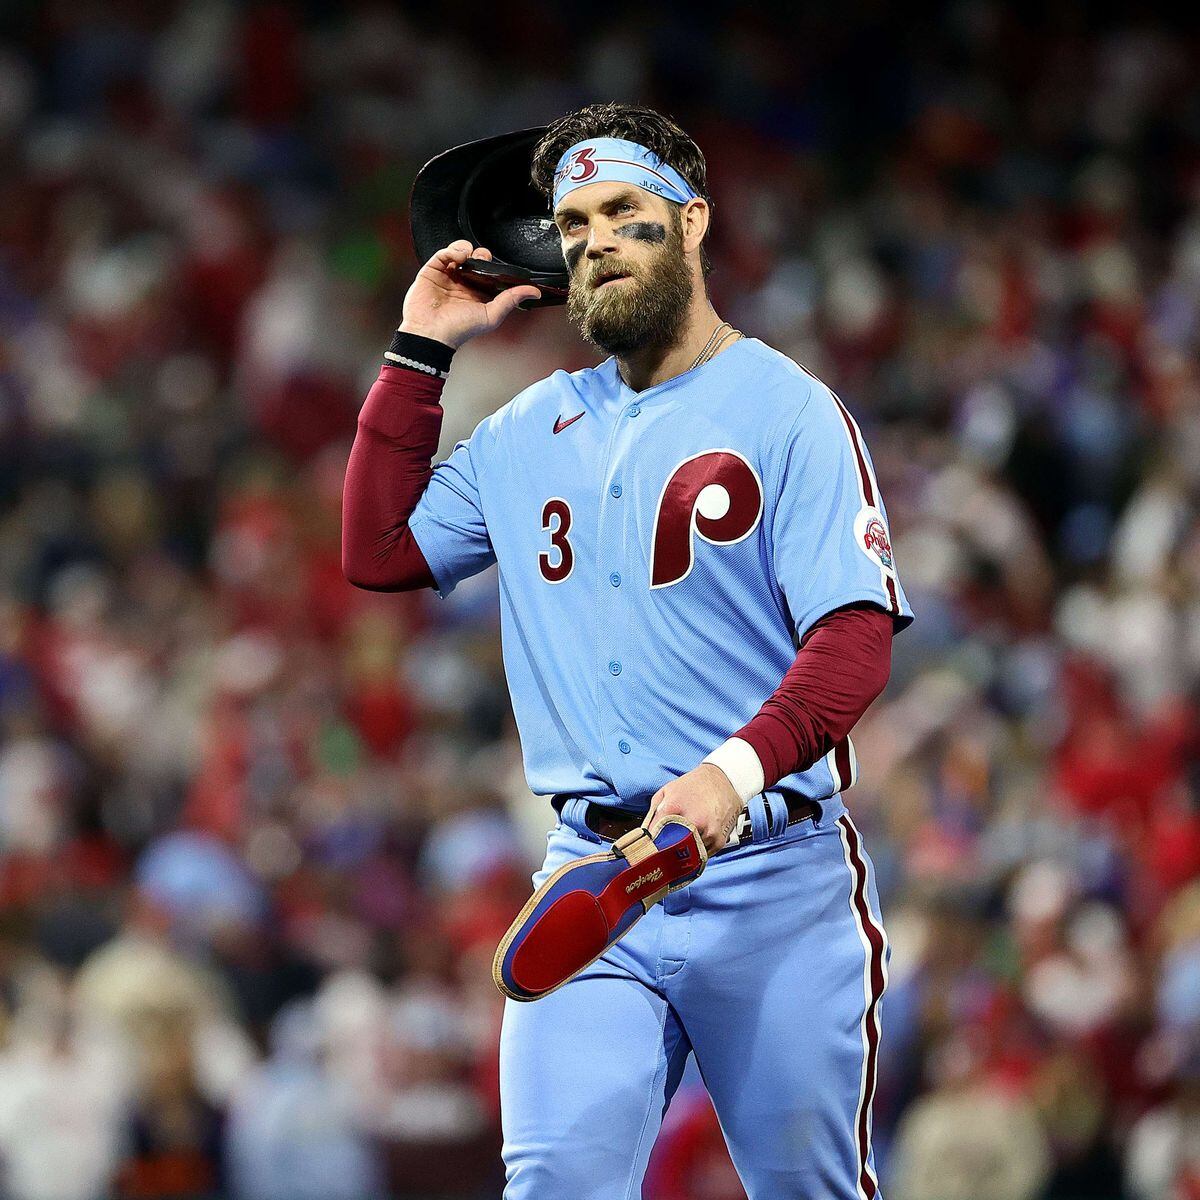 Bryce Harper is reportedly dealing with sore elbow